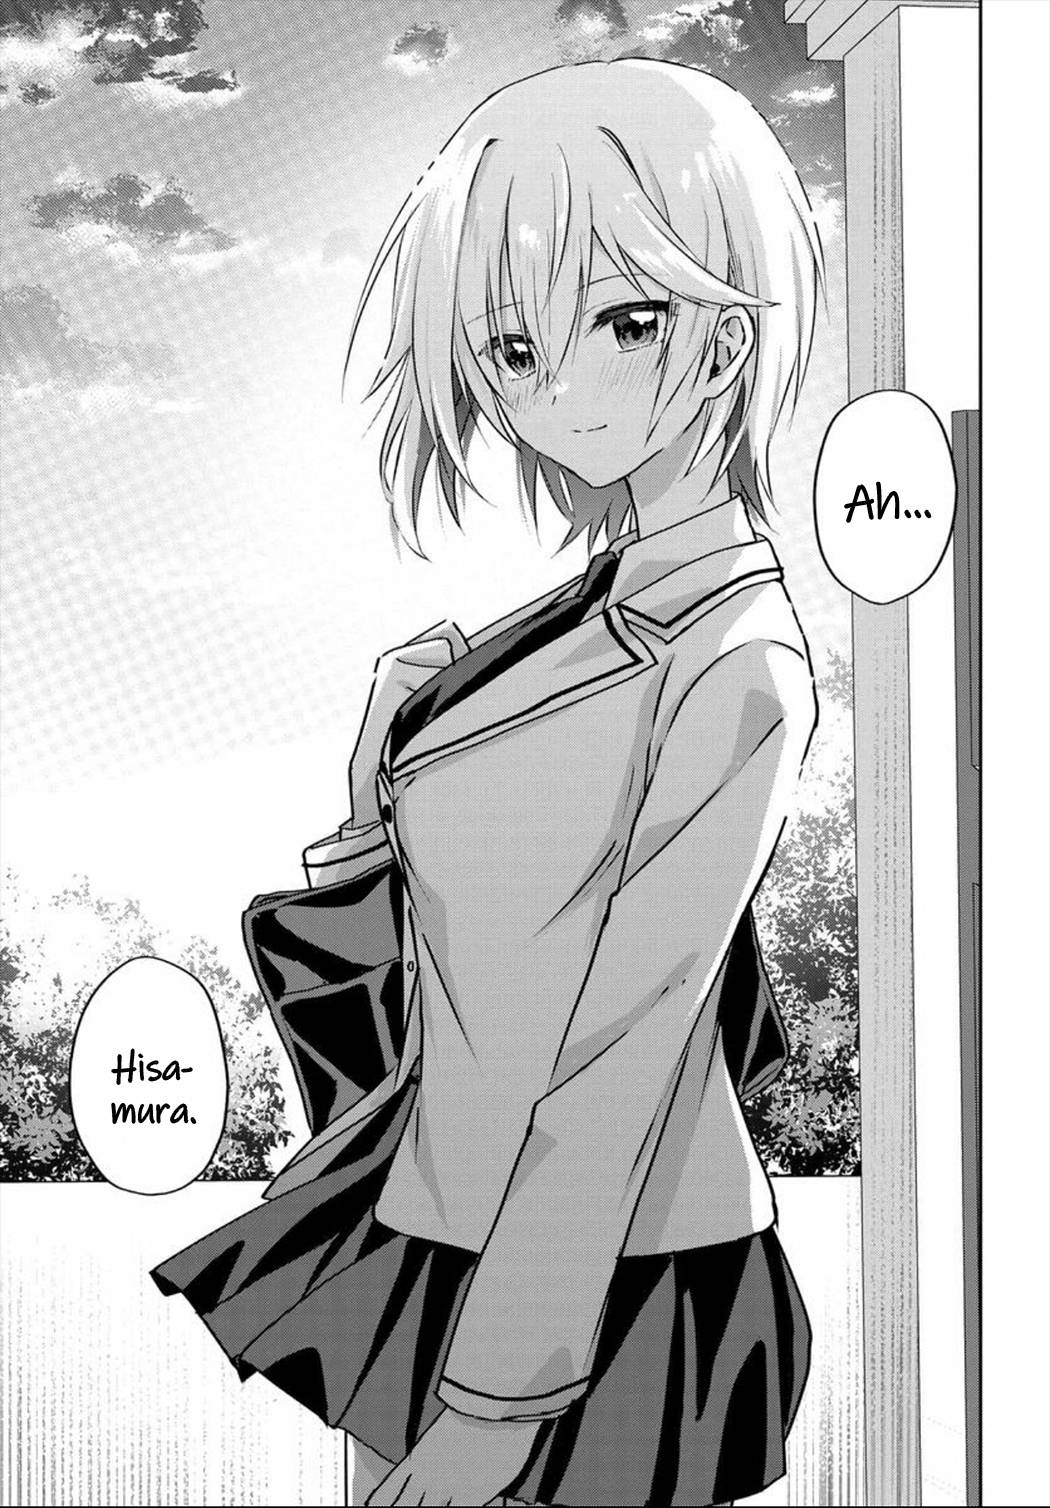 Since I’Ve Entered The World Of Romantic Comedy Manga, I’Ll Do My Best To Make The Losing Heroine Happy - chapter 3.5 - #3